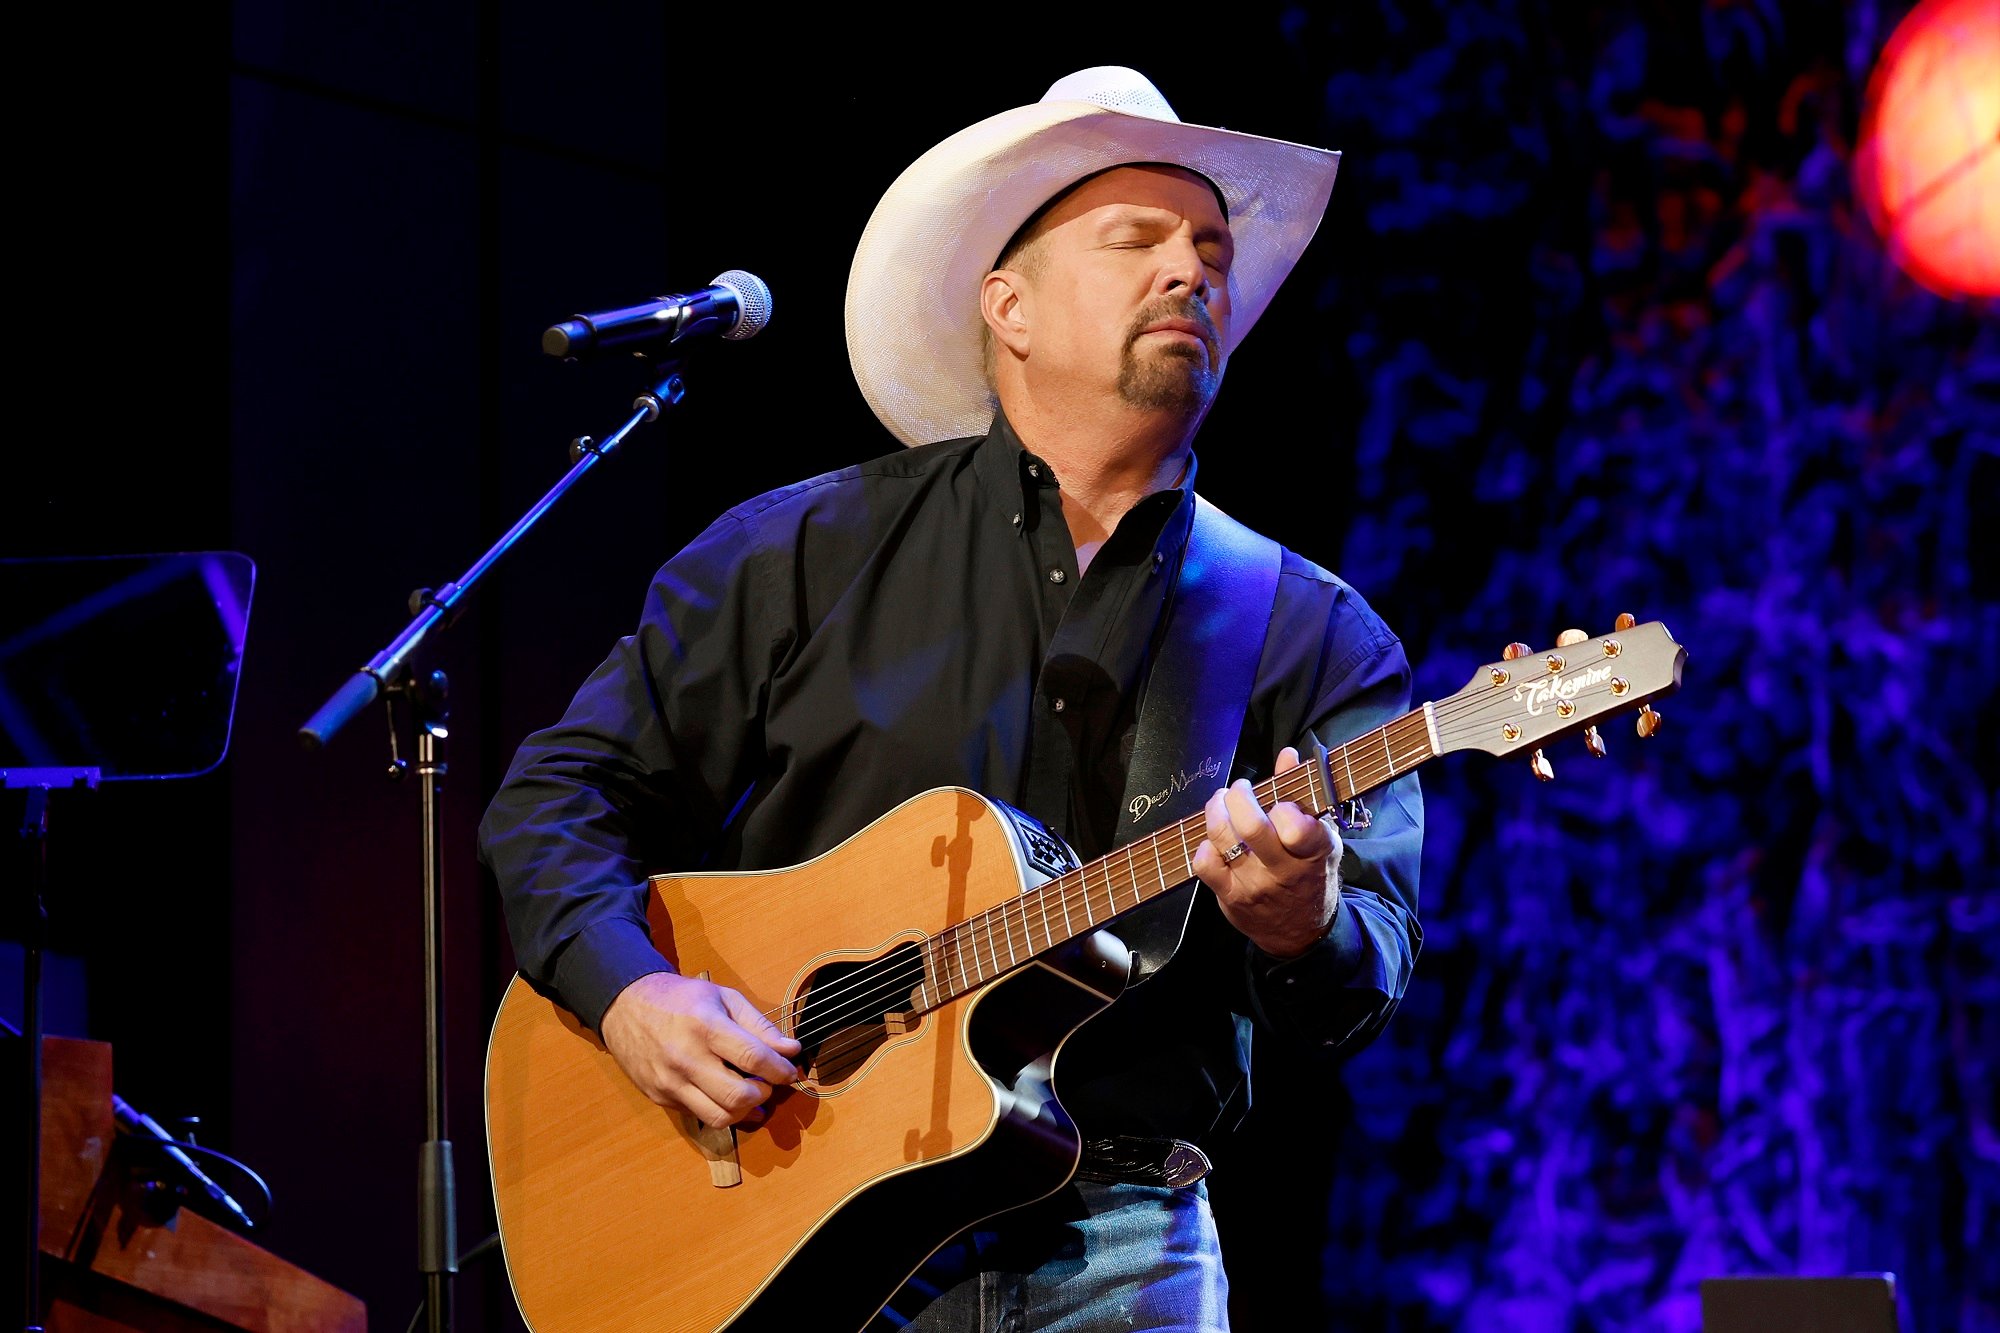 Garth Brooks plays an acoustic guitar on stage